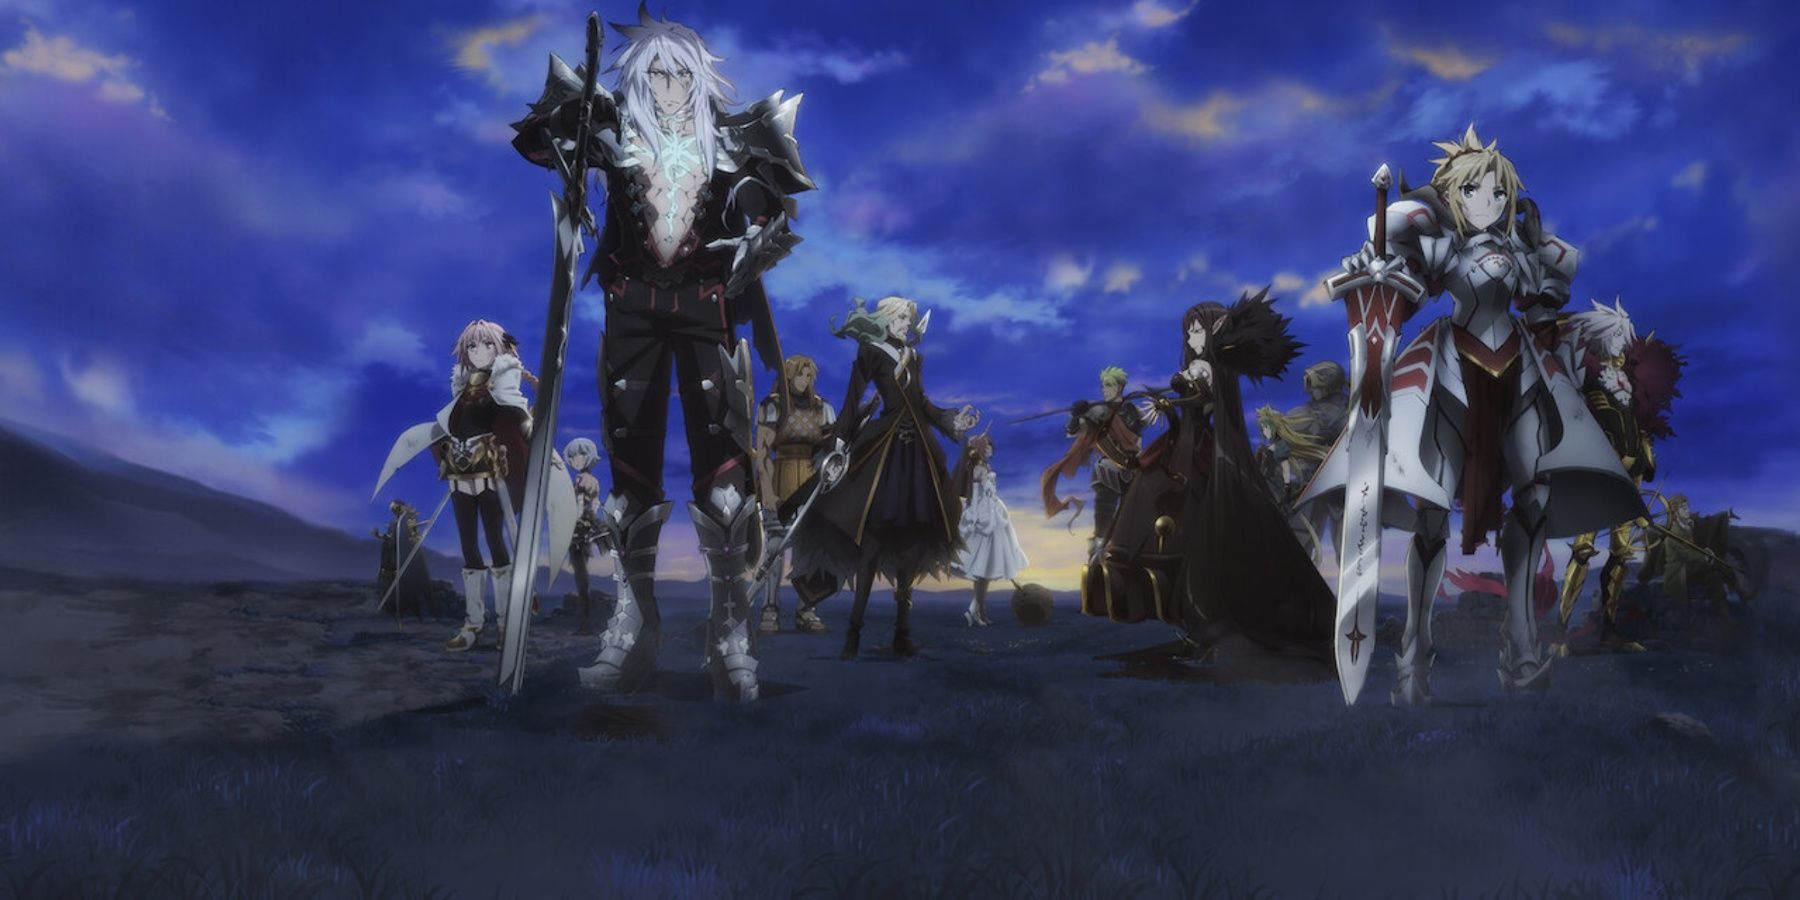 The Heroic Spirits of the Red & Black Factions in Fate/Apocrypha All Assembled